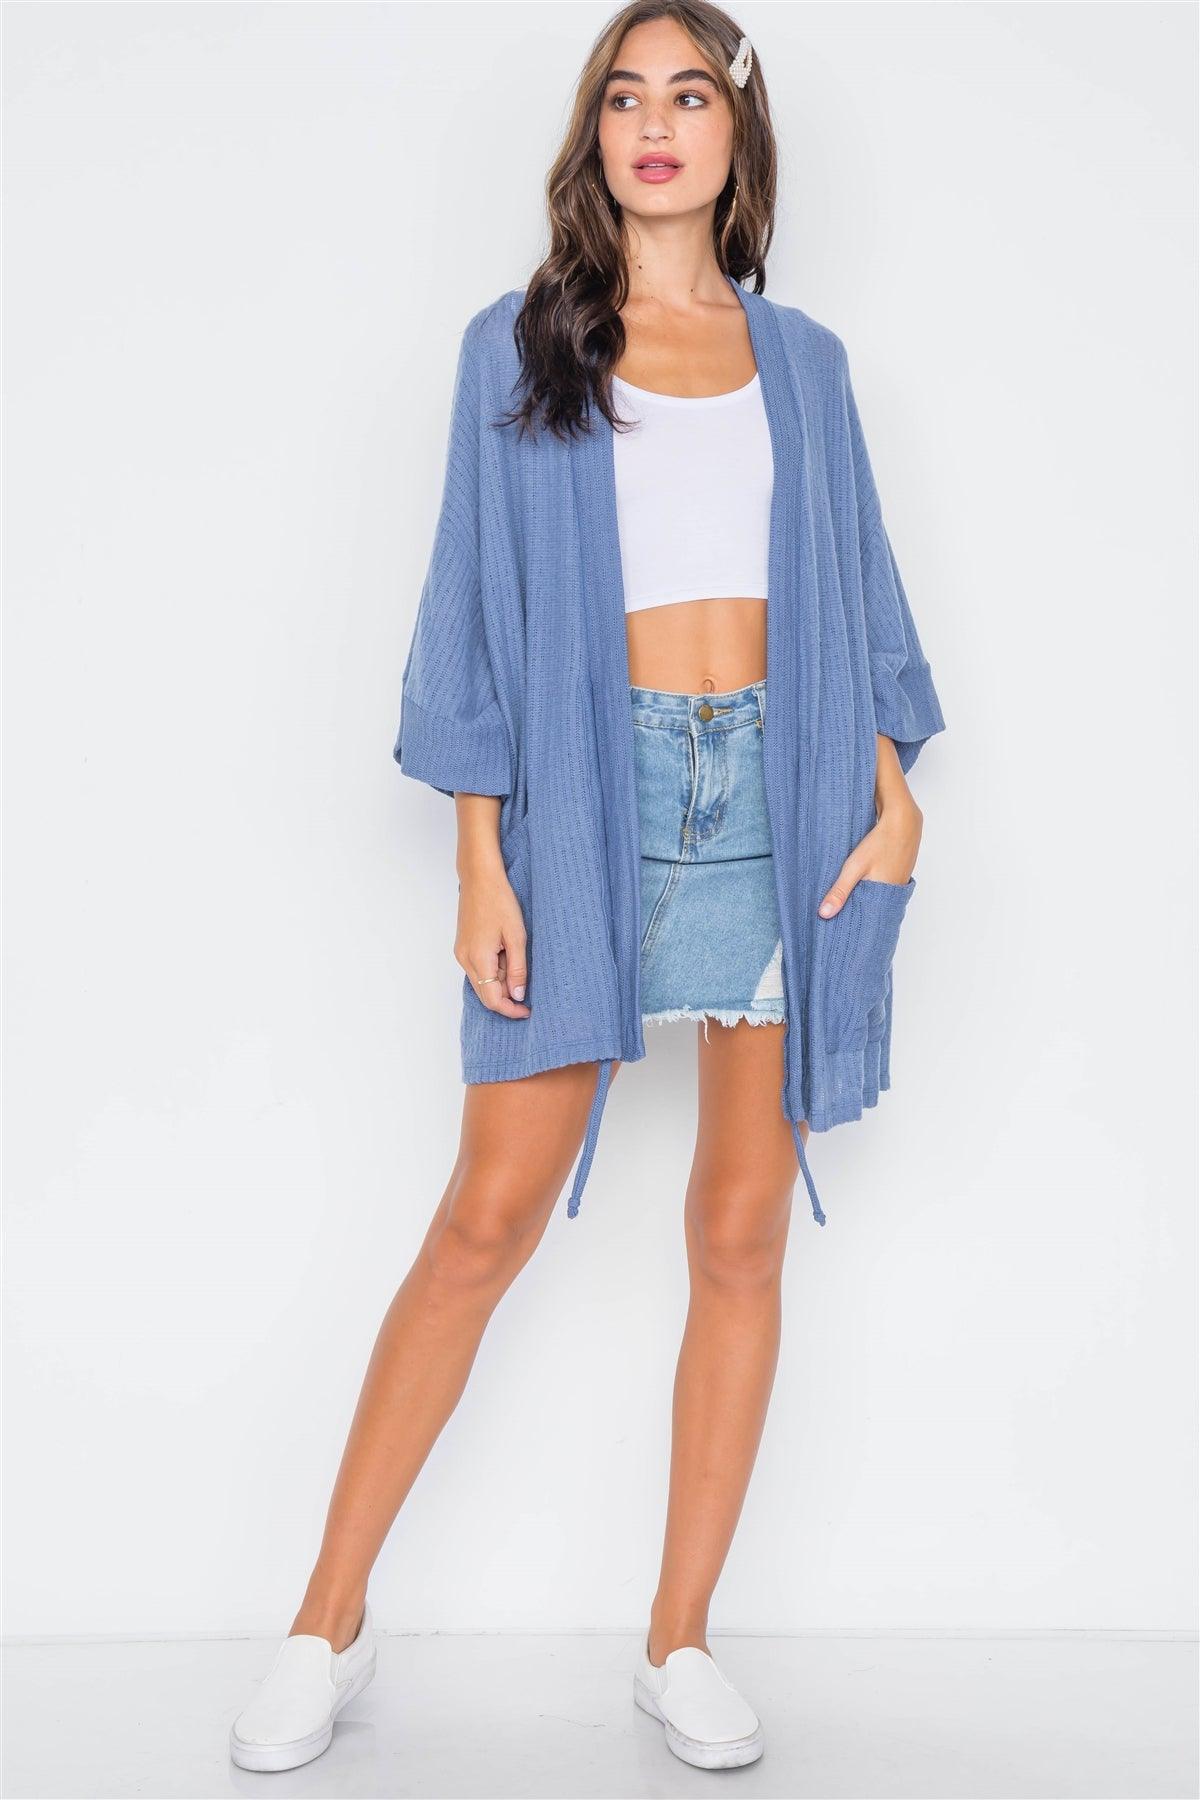 Blue Ribbed Soft Open Front Cardigan / 2-2-2